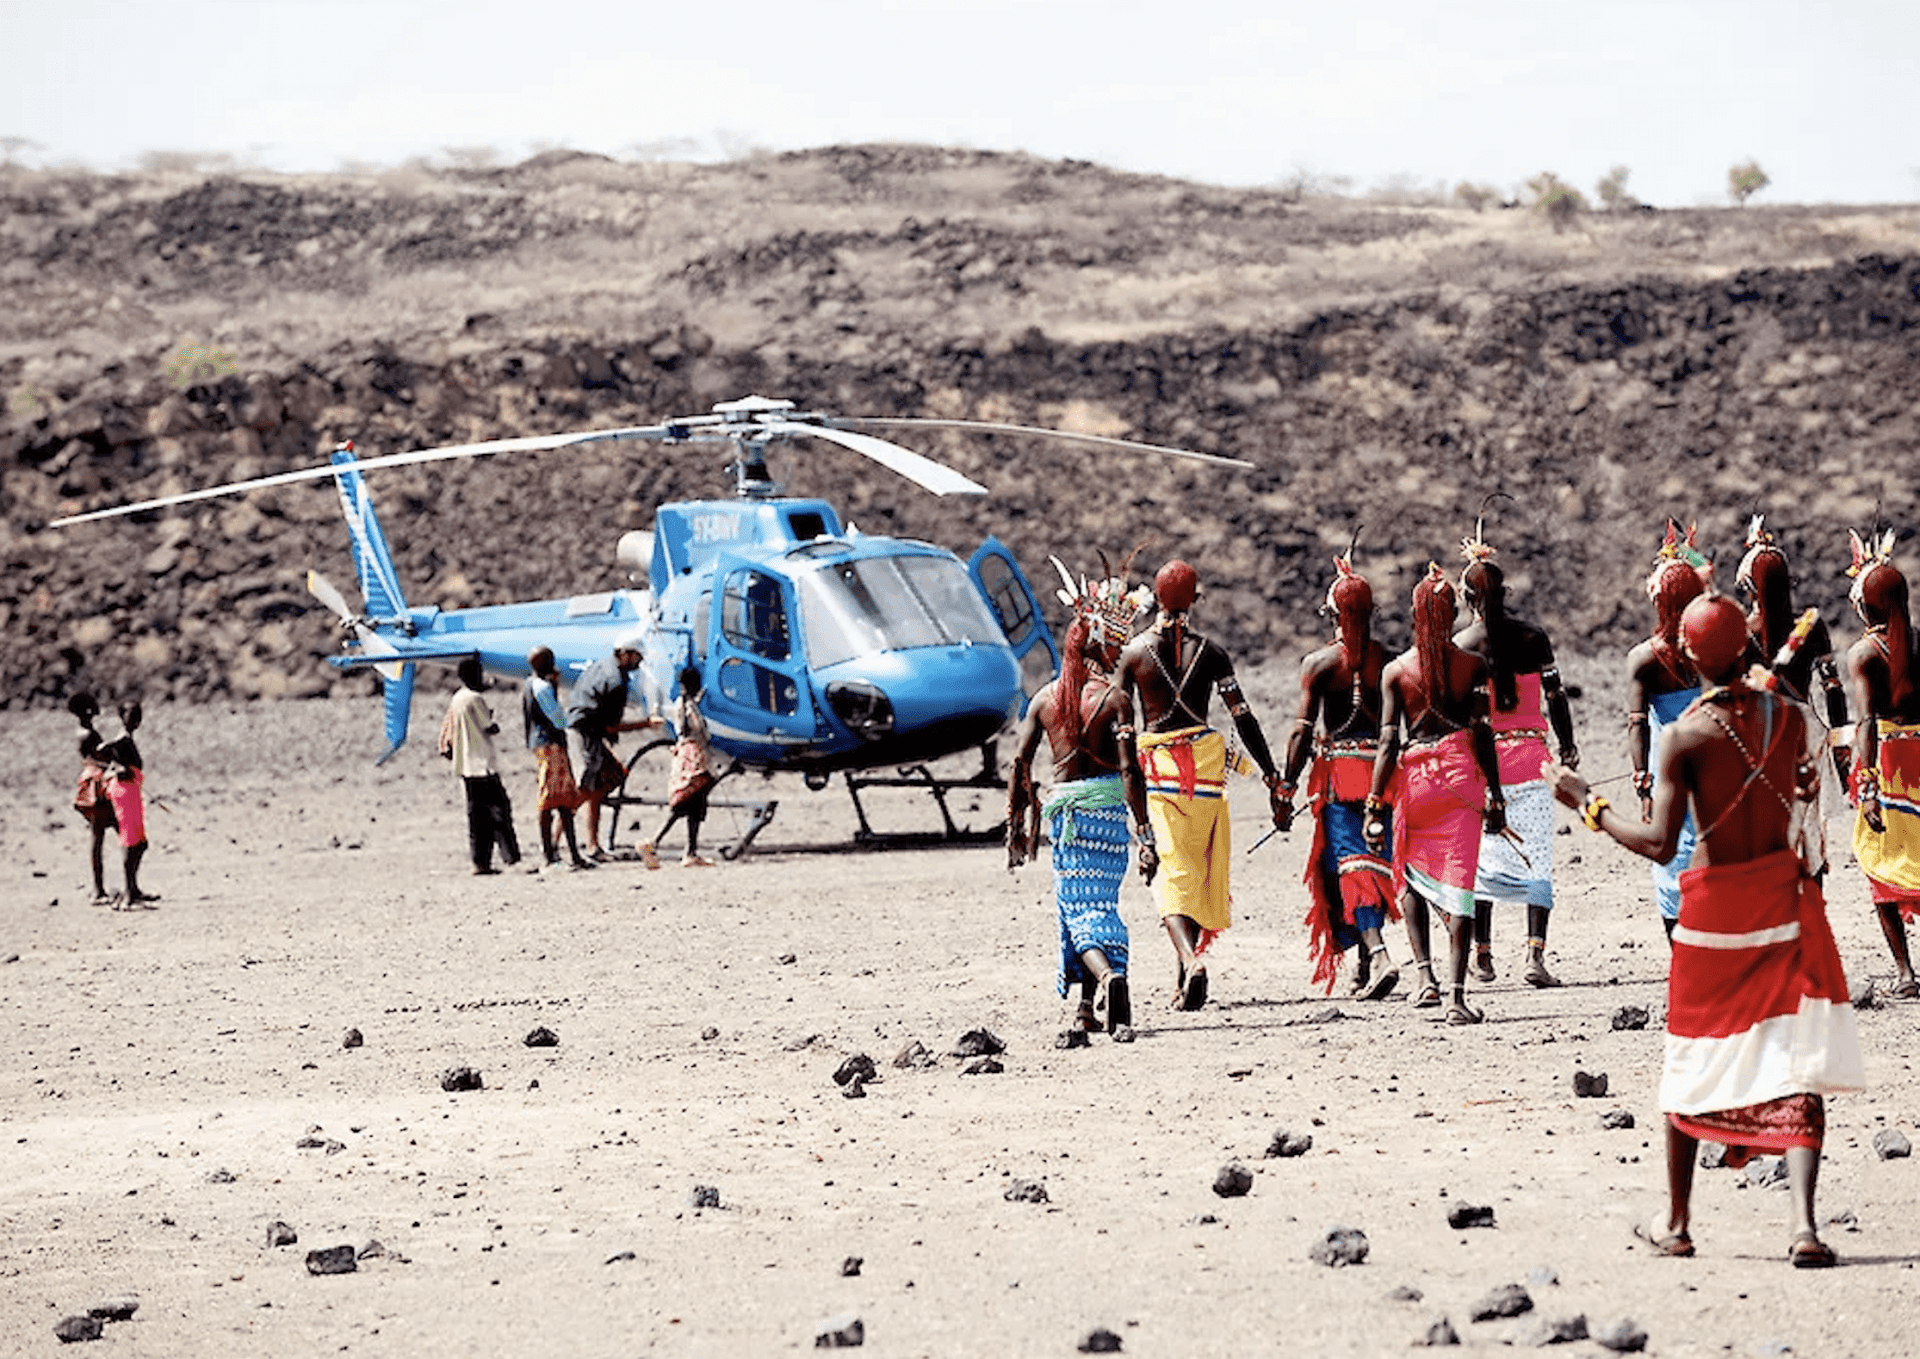 A crowd of people in colorful wraps and intricate headdresses gathers in a rocky landscape around a bright blue helicopter on this trip of a lifetime